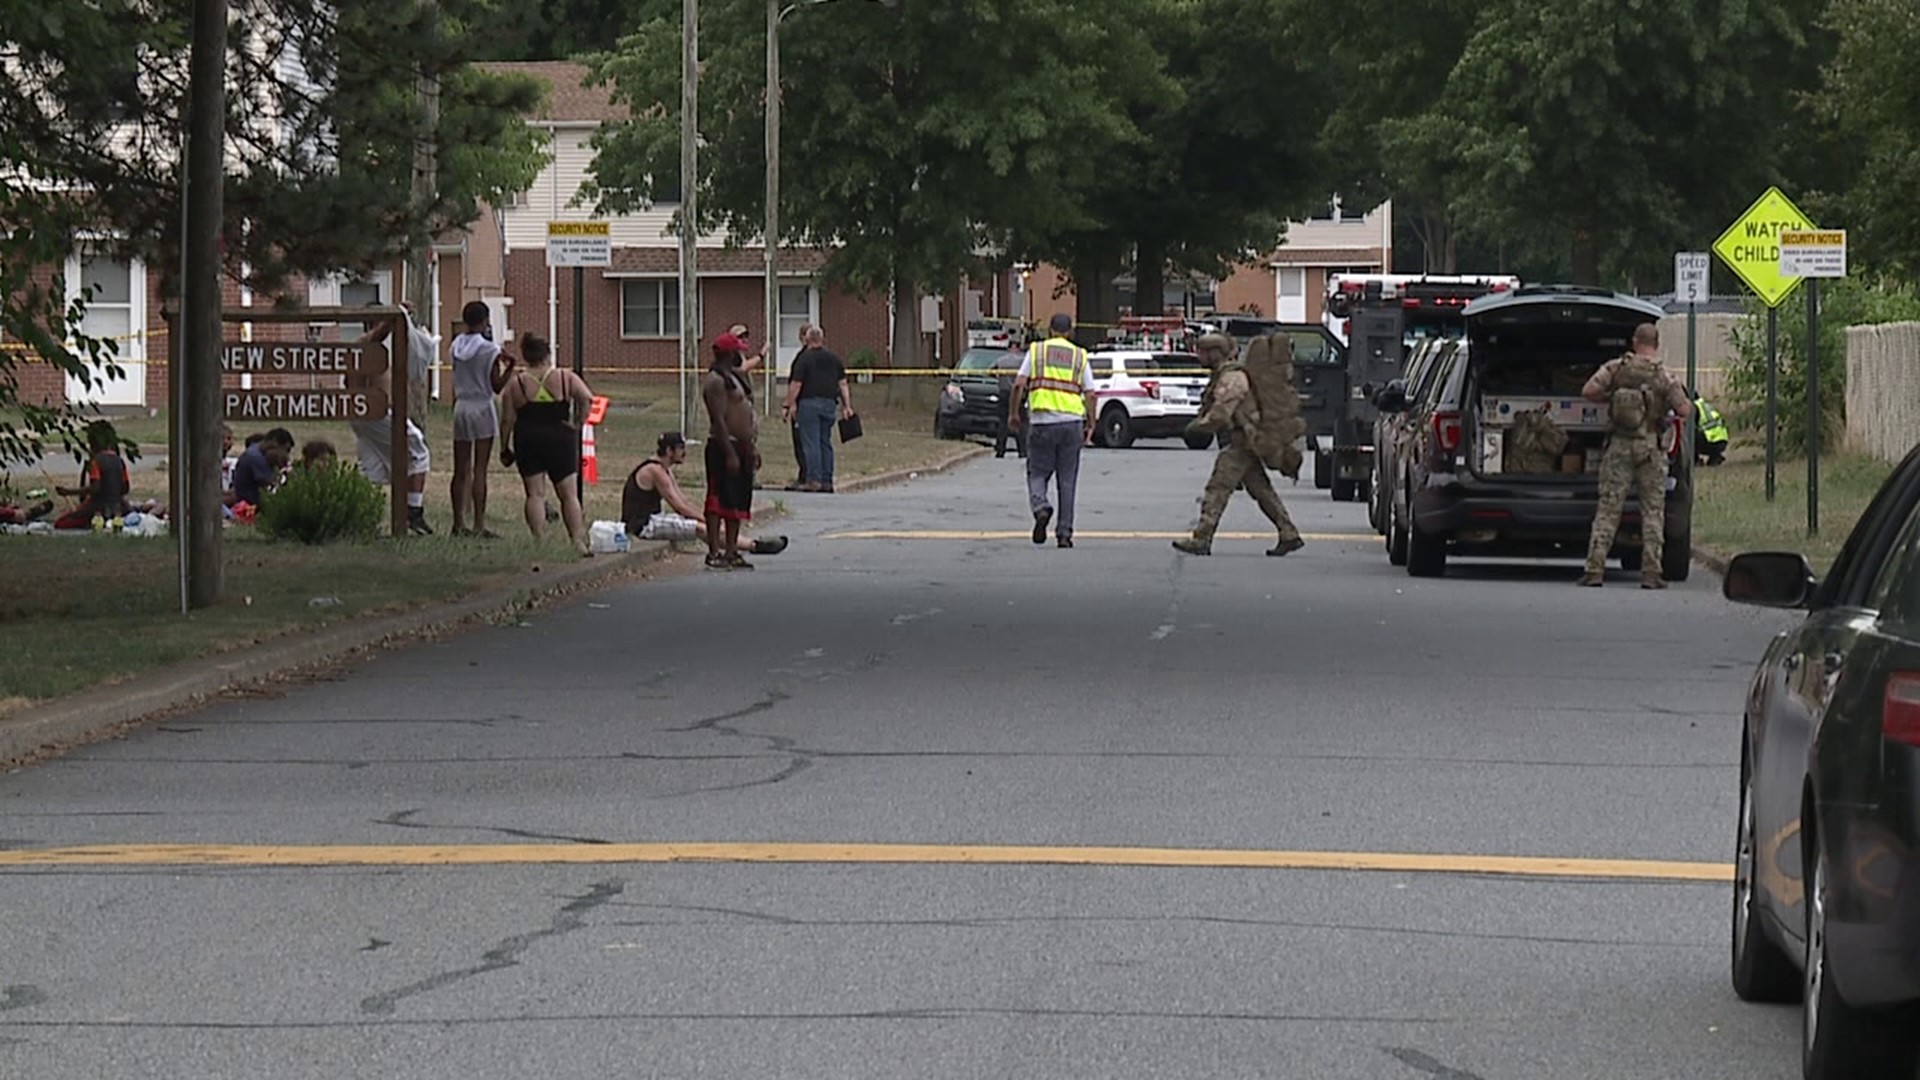 The police presence began around 5 p.m. along New Street in Plymouth.